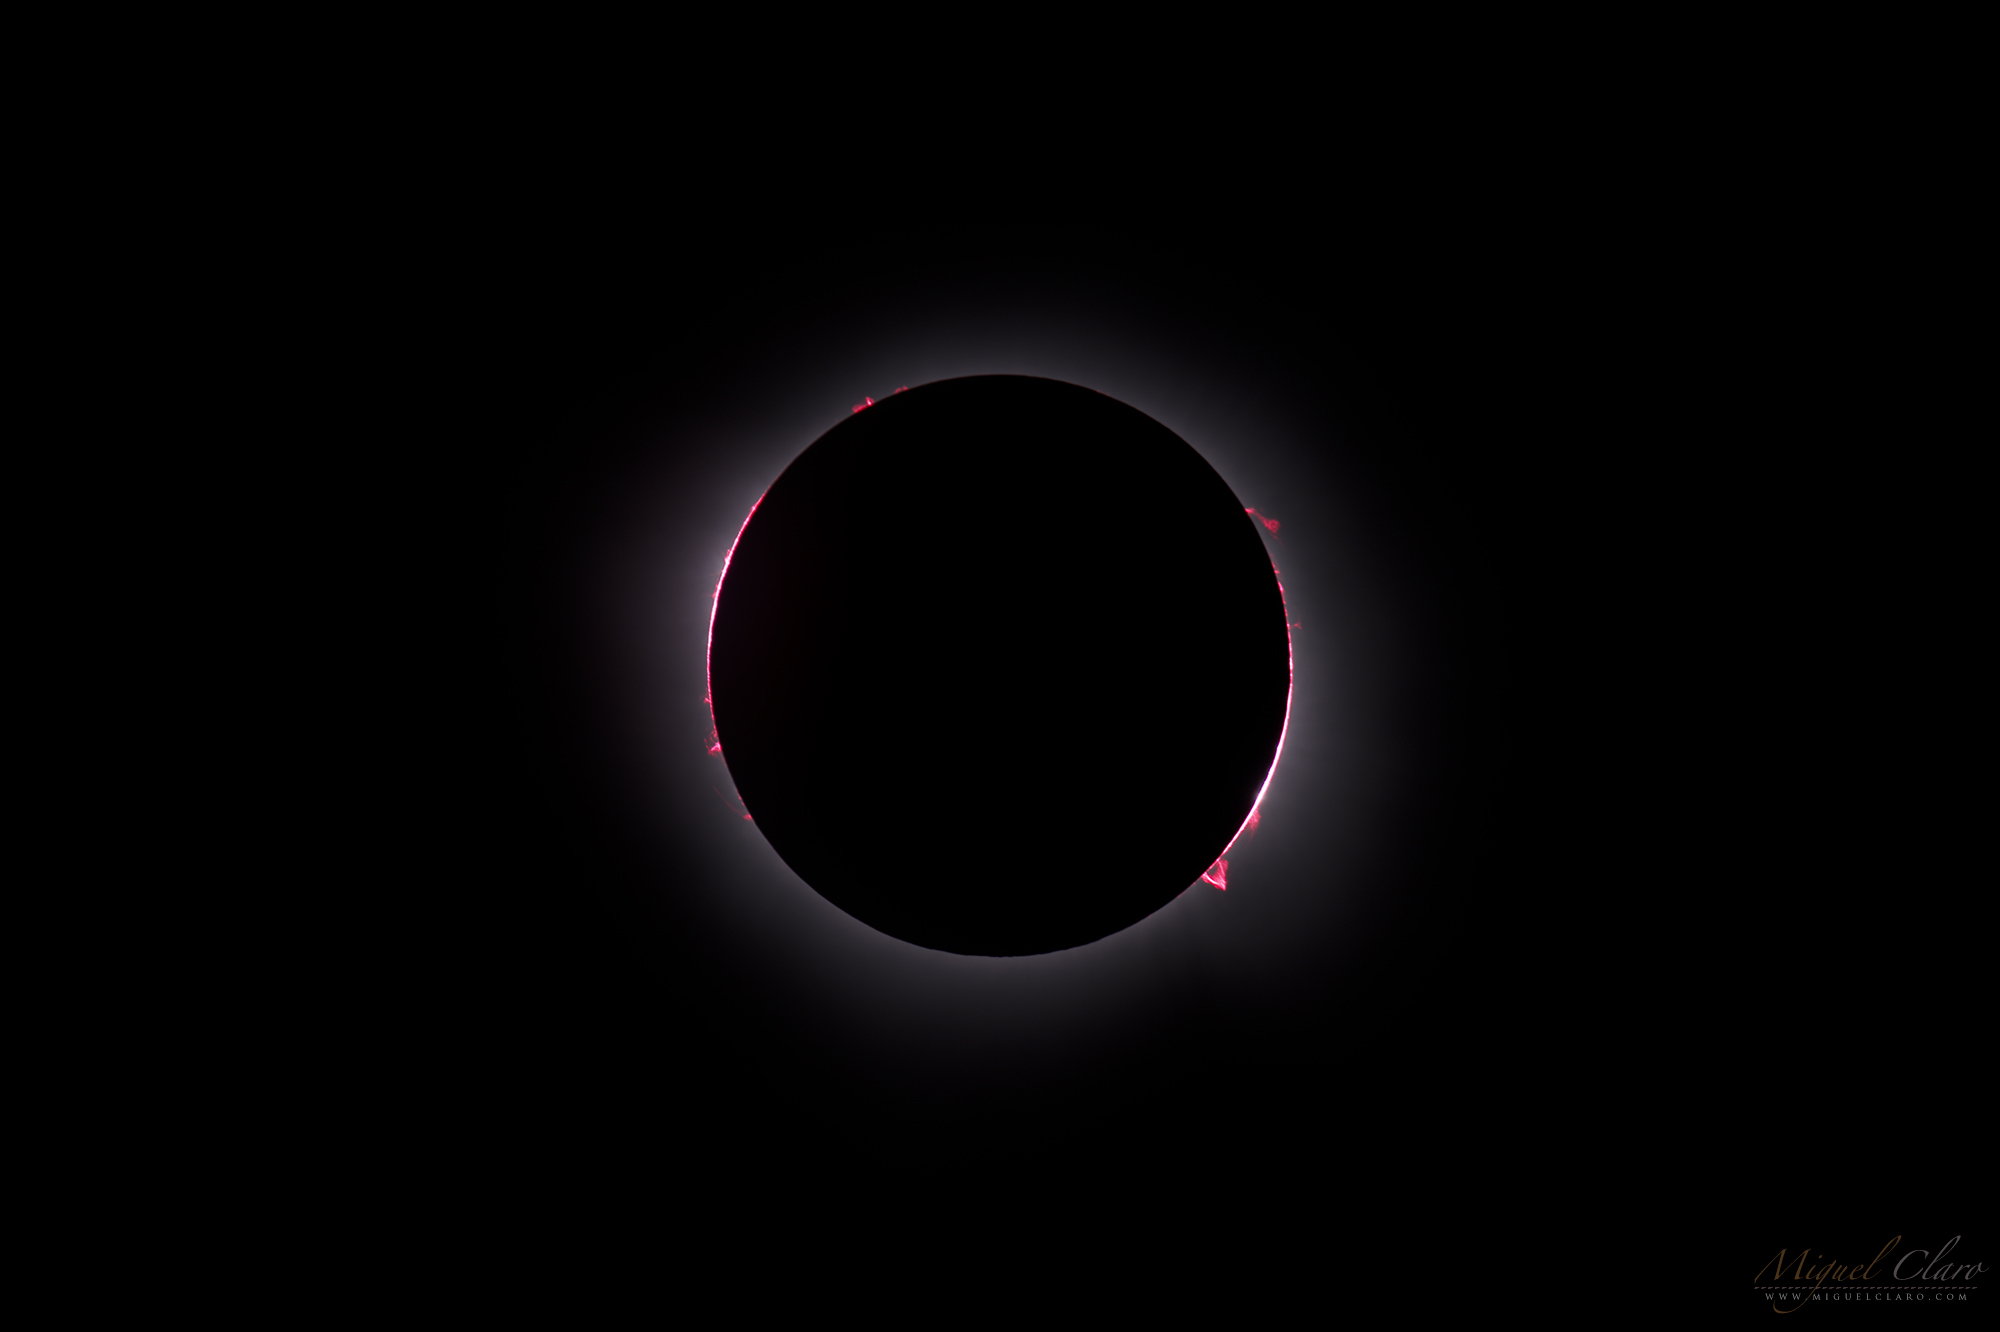 a large, central black disc in a black scape is circled in a faint white light, accented with tiny, fiery pink prominences jetting from the edge.